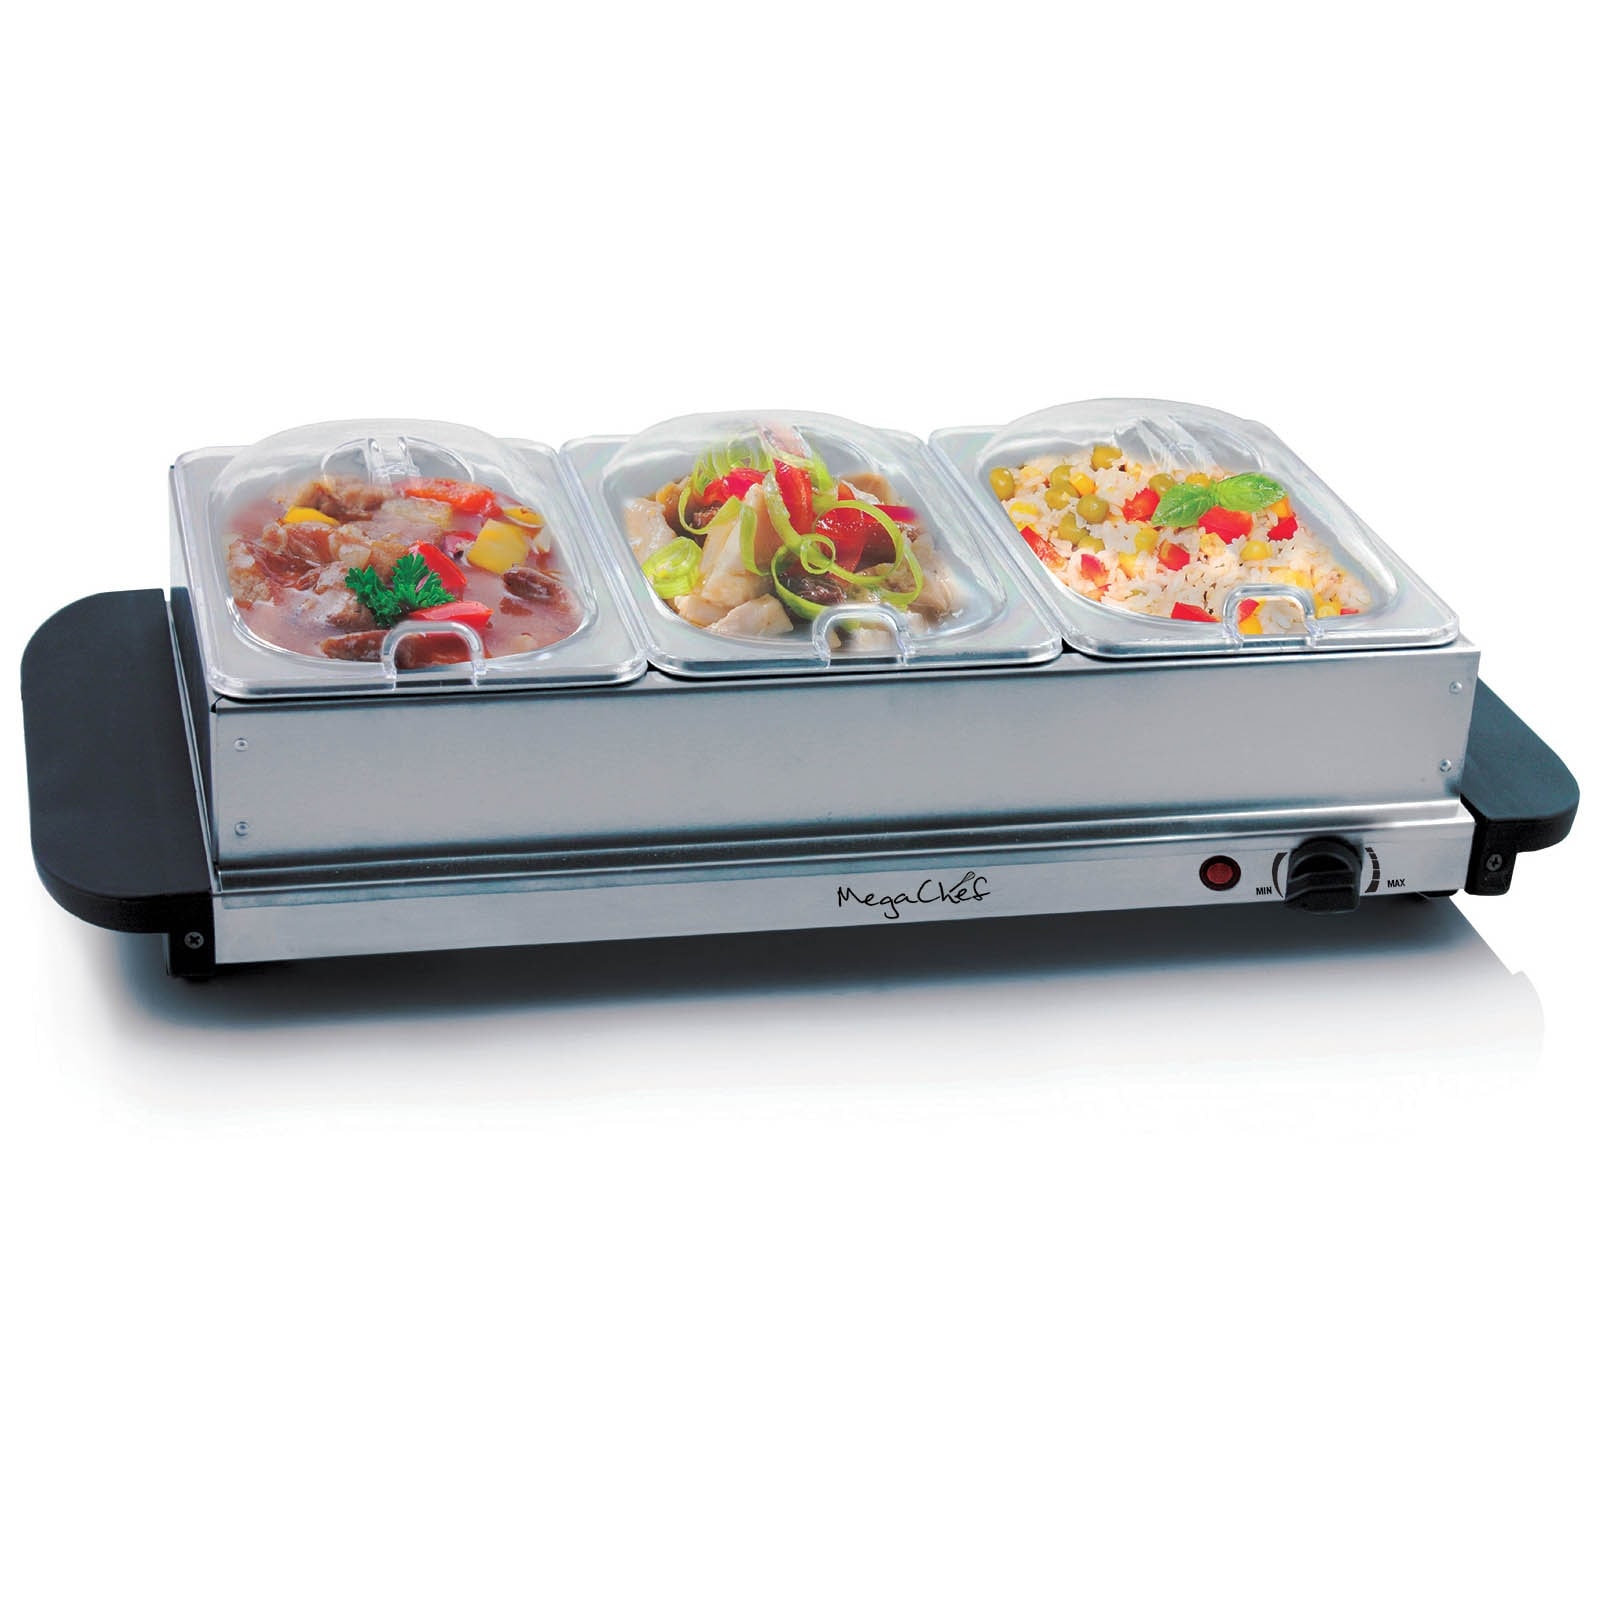 https://ak1.ostkcdn.com/images/products/is/images/direct/dff4480a11a0089050450749d0aadc587fe68d0d/MegaChef-Buffet-Server-%26-Food-Warmer-Tray-Holder-with-Three-Sections.jpg